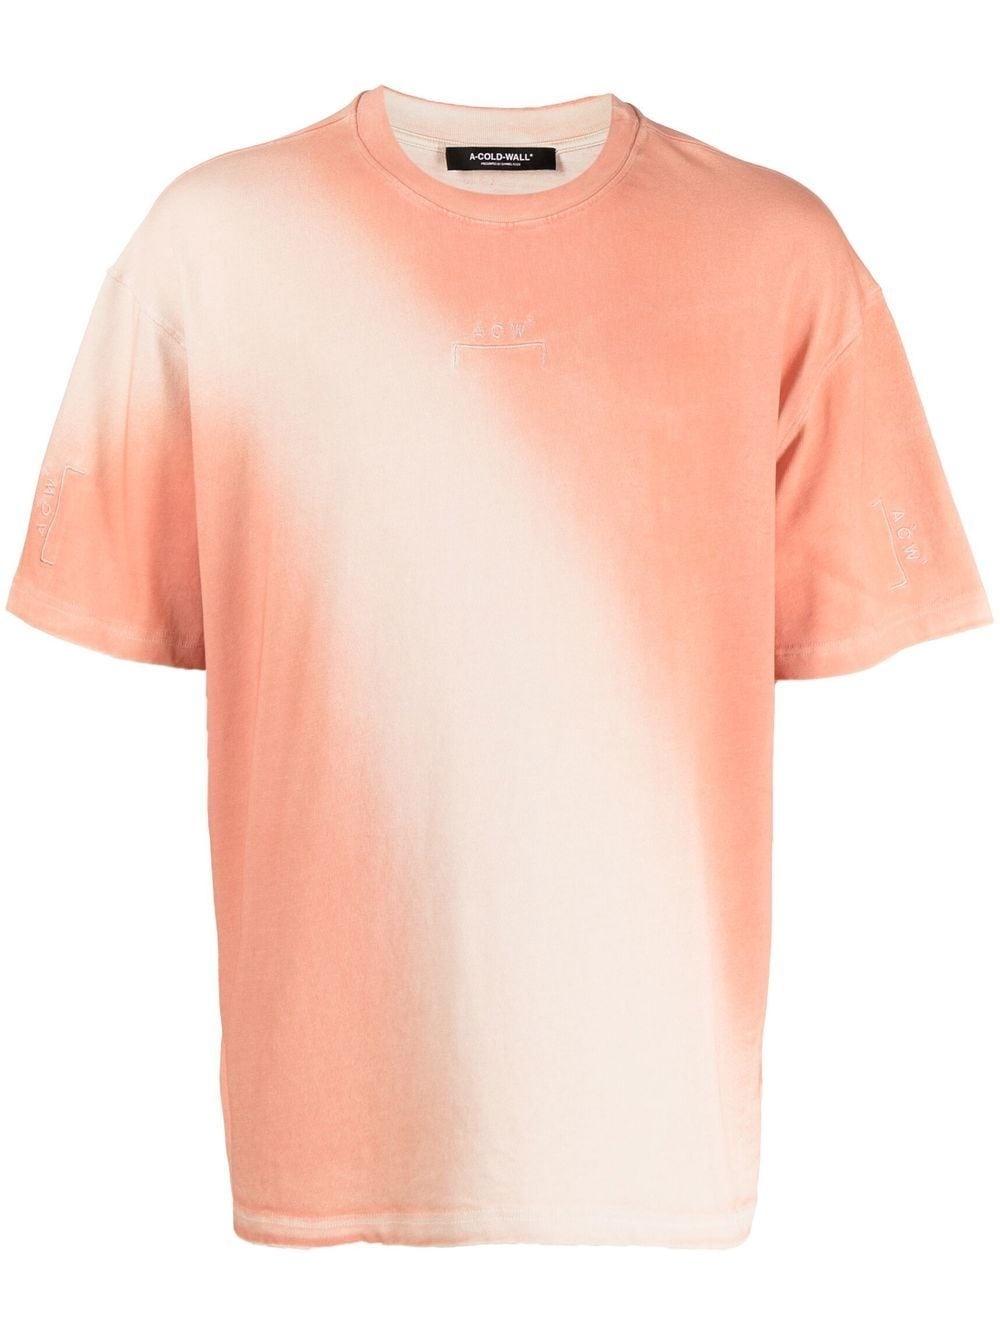 embroidered-logo gradient T-shirt - 1